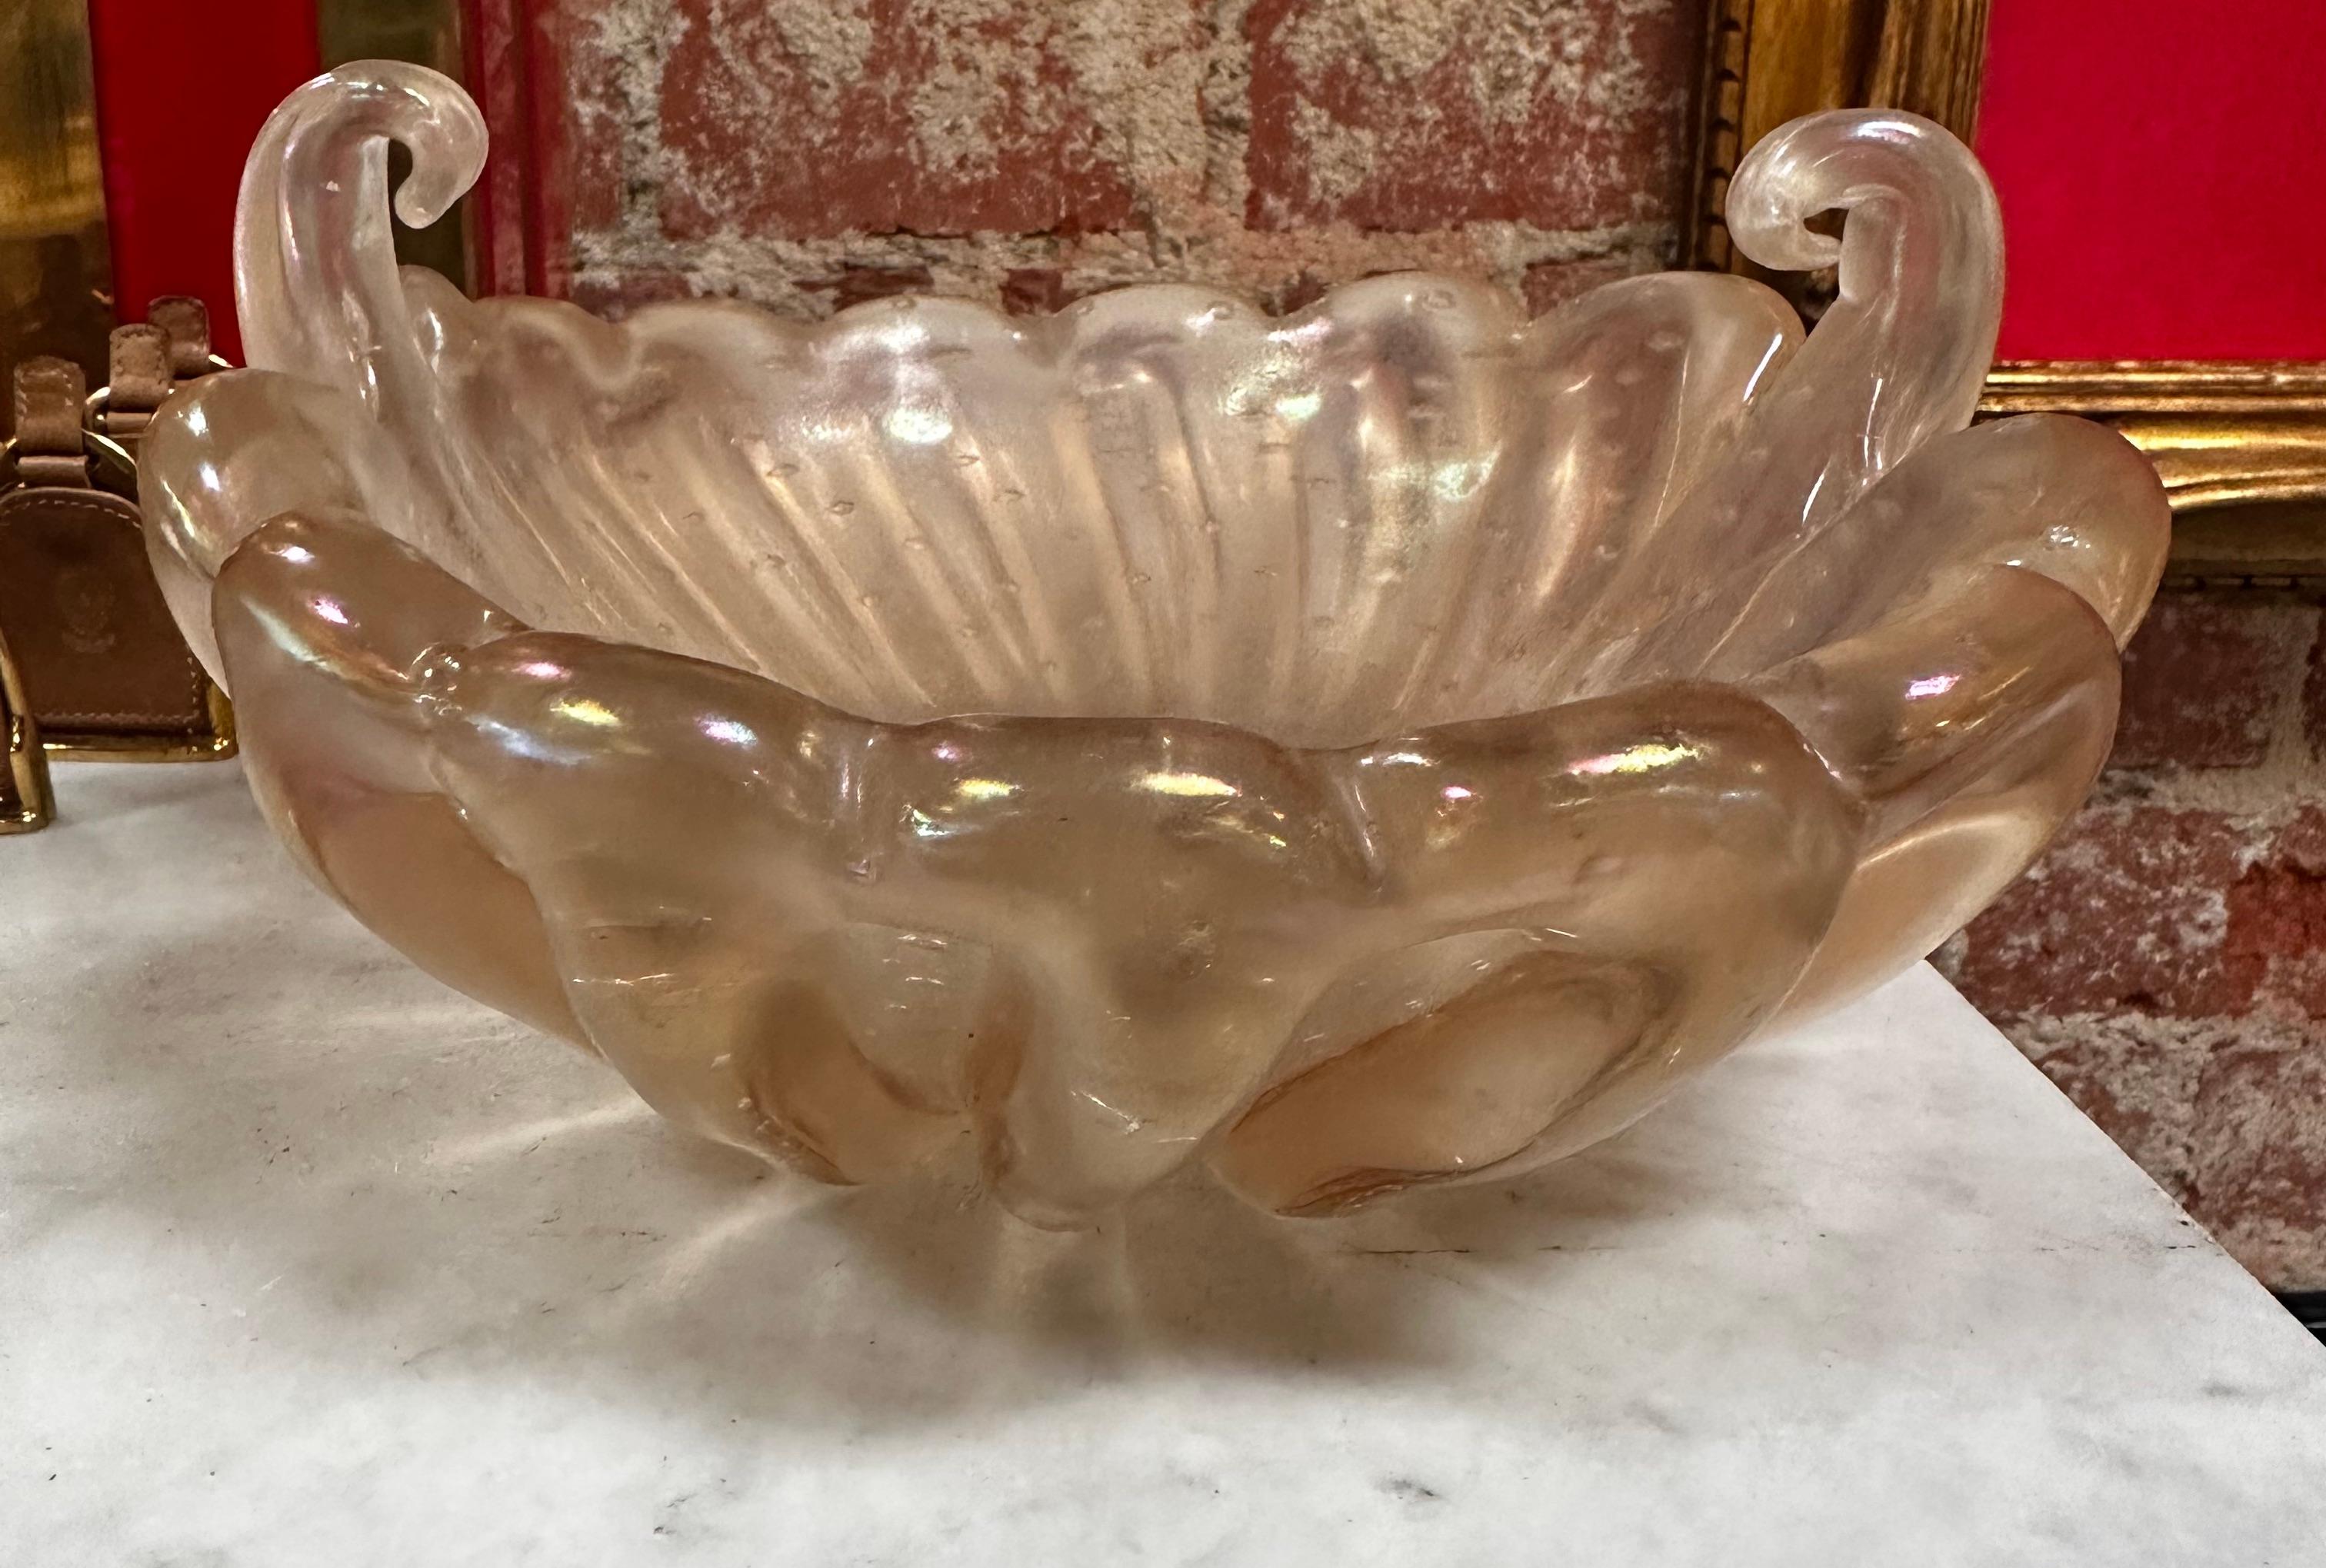 Mid-20th Century Italian Decorative Handmade Glass Bowl By Ercole Barovier 1940 For Sale